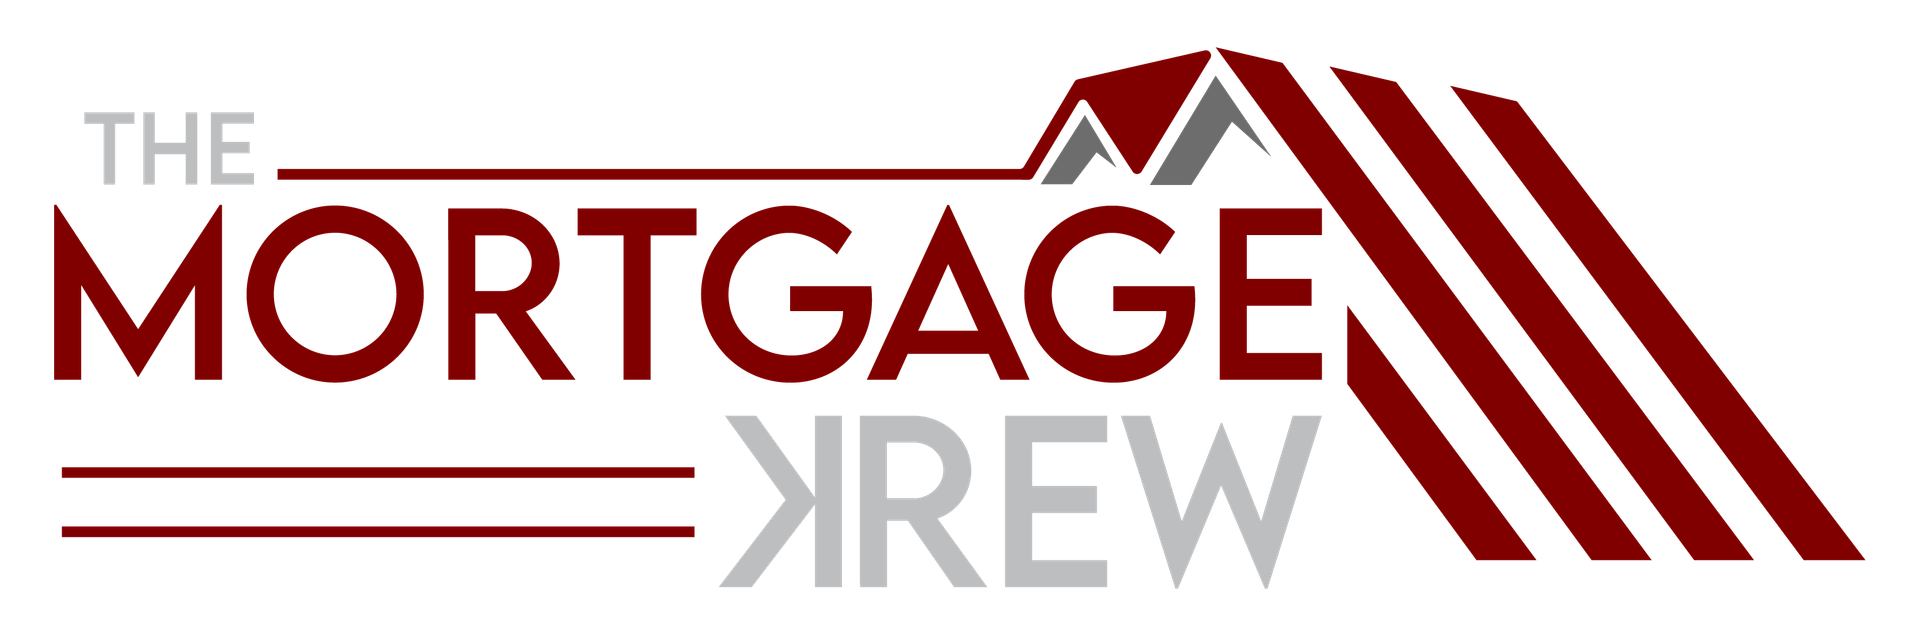 The Mortgage Krew